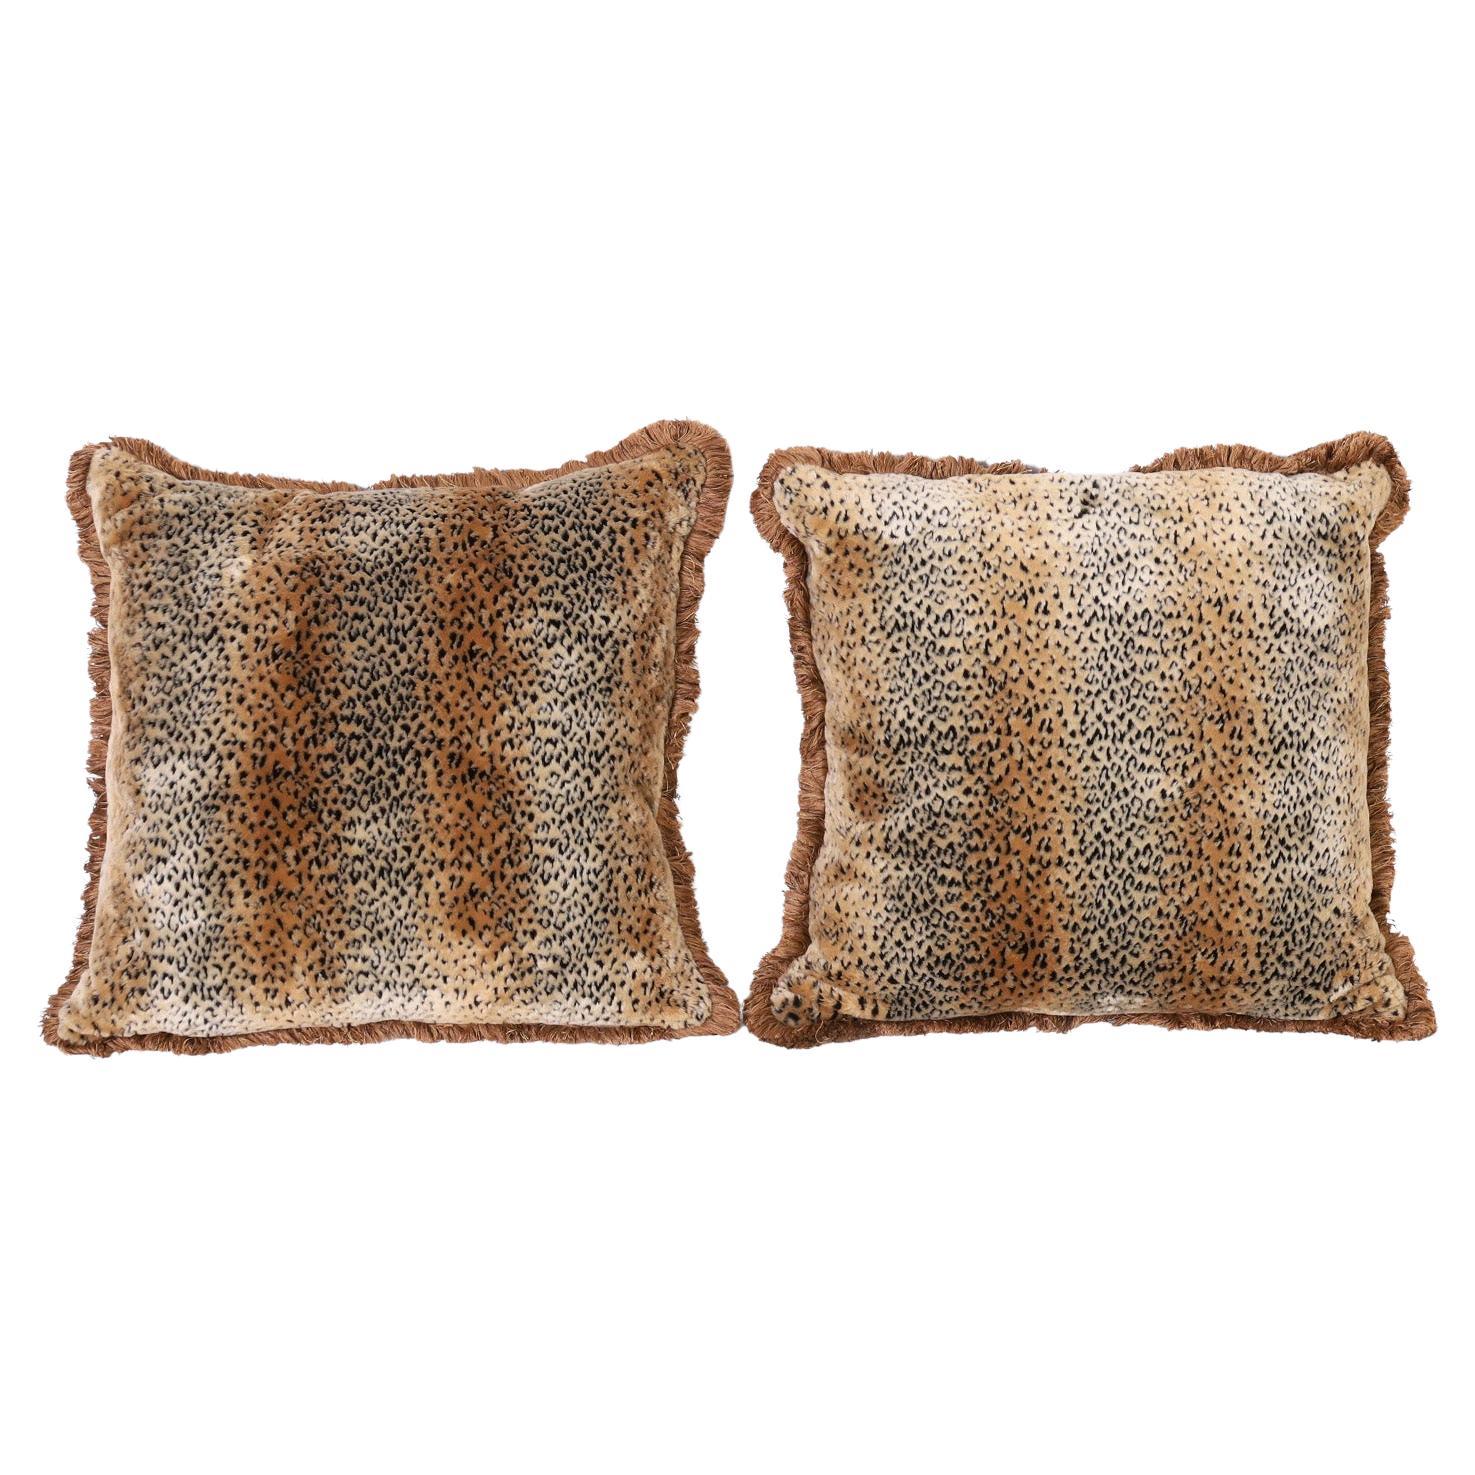 Custom Leopard Print Oversize Pillows, Priced Individually For Sale